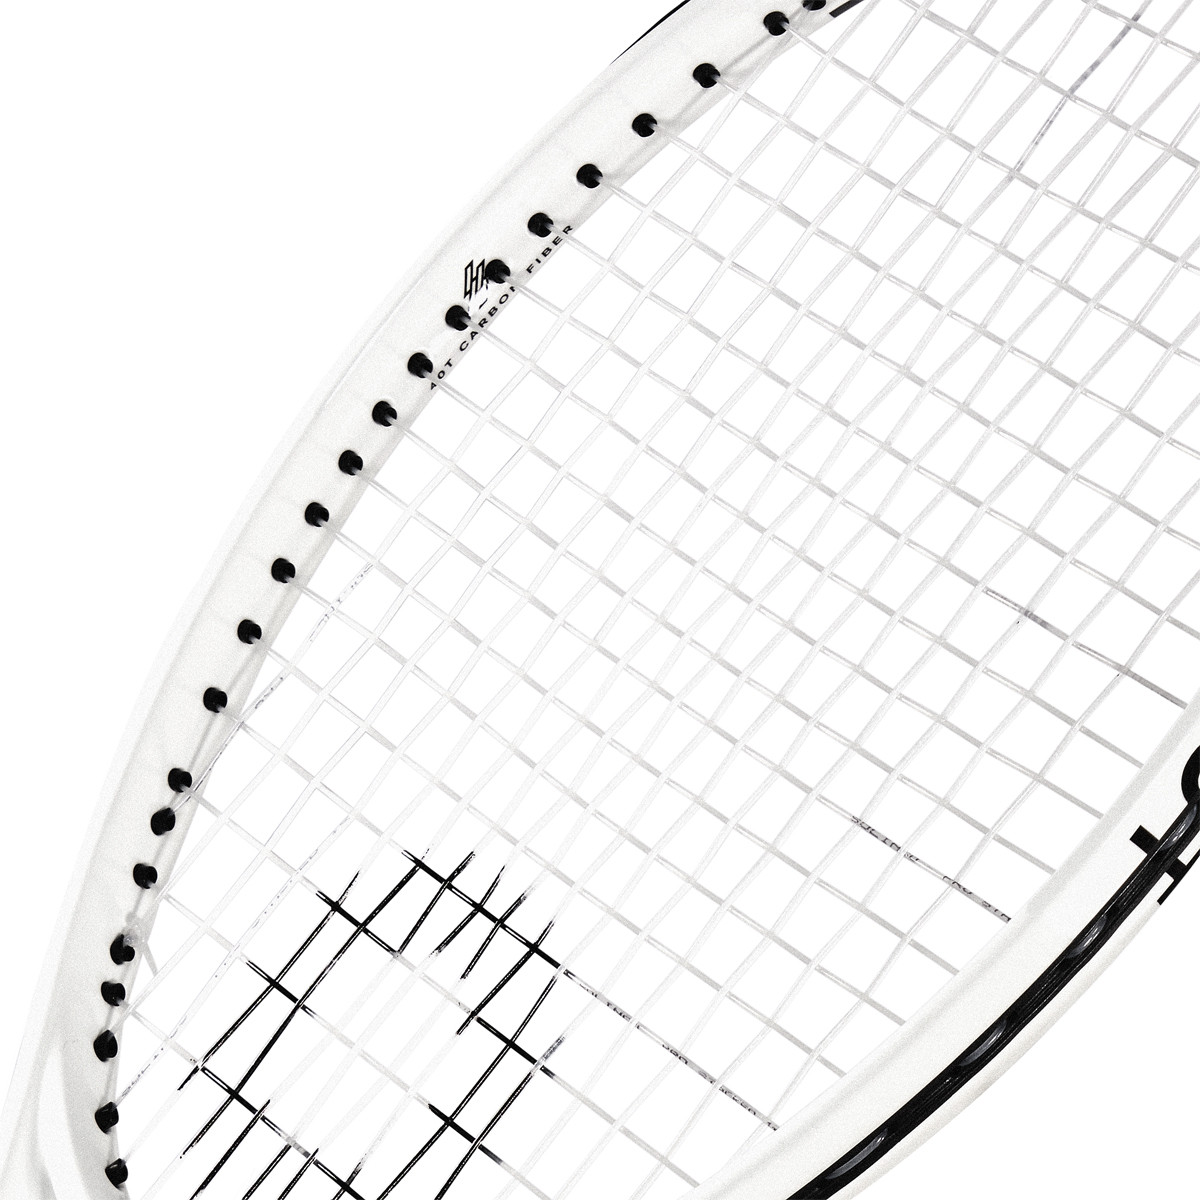 Solinco Whiteout 98 (290g) Racket